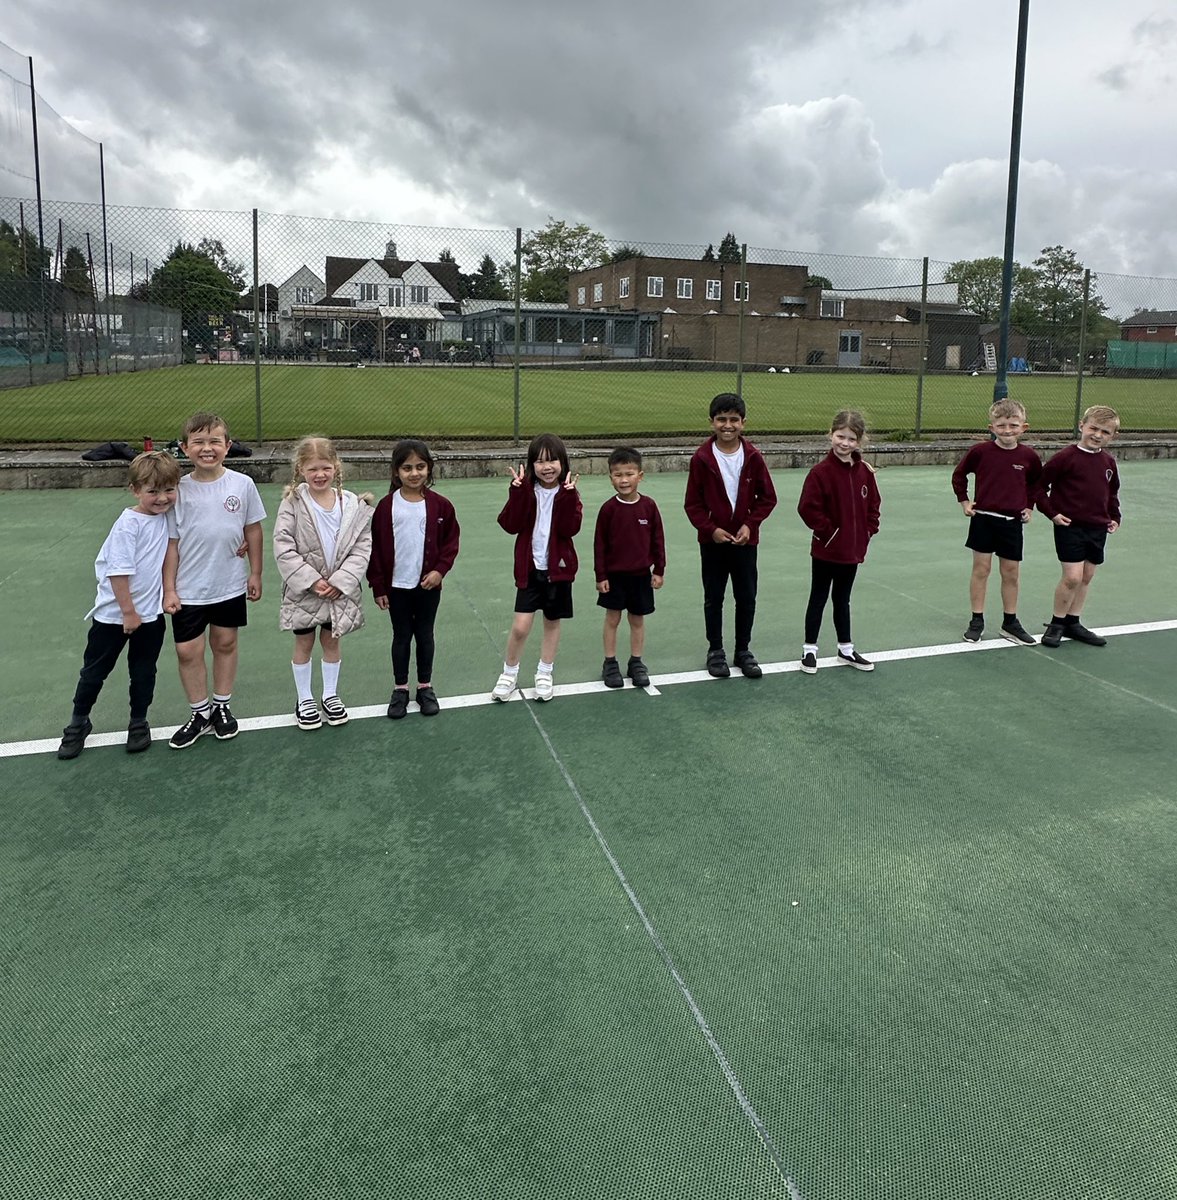 A few year 1&2 children have arrived at the @SSPSutton Multi Skills event this morning.🏏 They are all excited to take part in a range of sports such as Cricket, Tennis and Squash. #LEOsports7 #LEOacademies